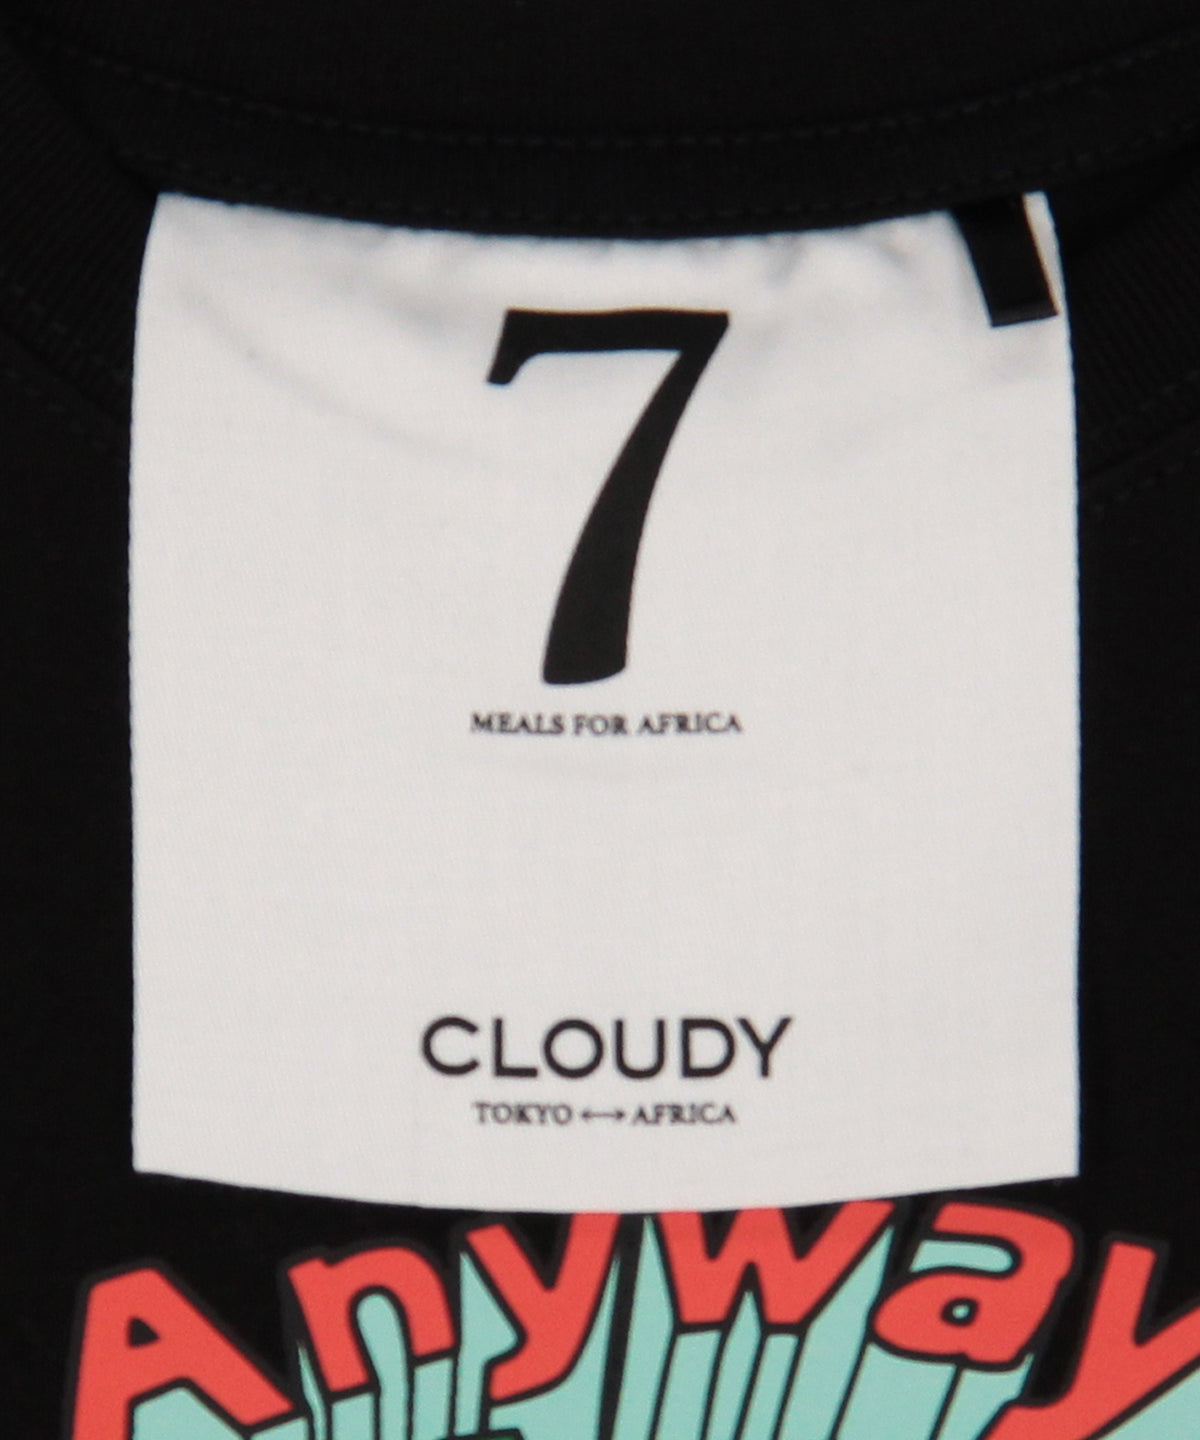 Kids Lunch T-shirt It's CLOUDY DAY  BLACK